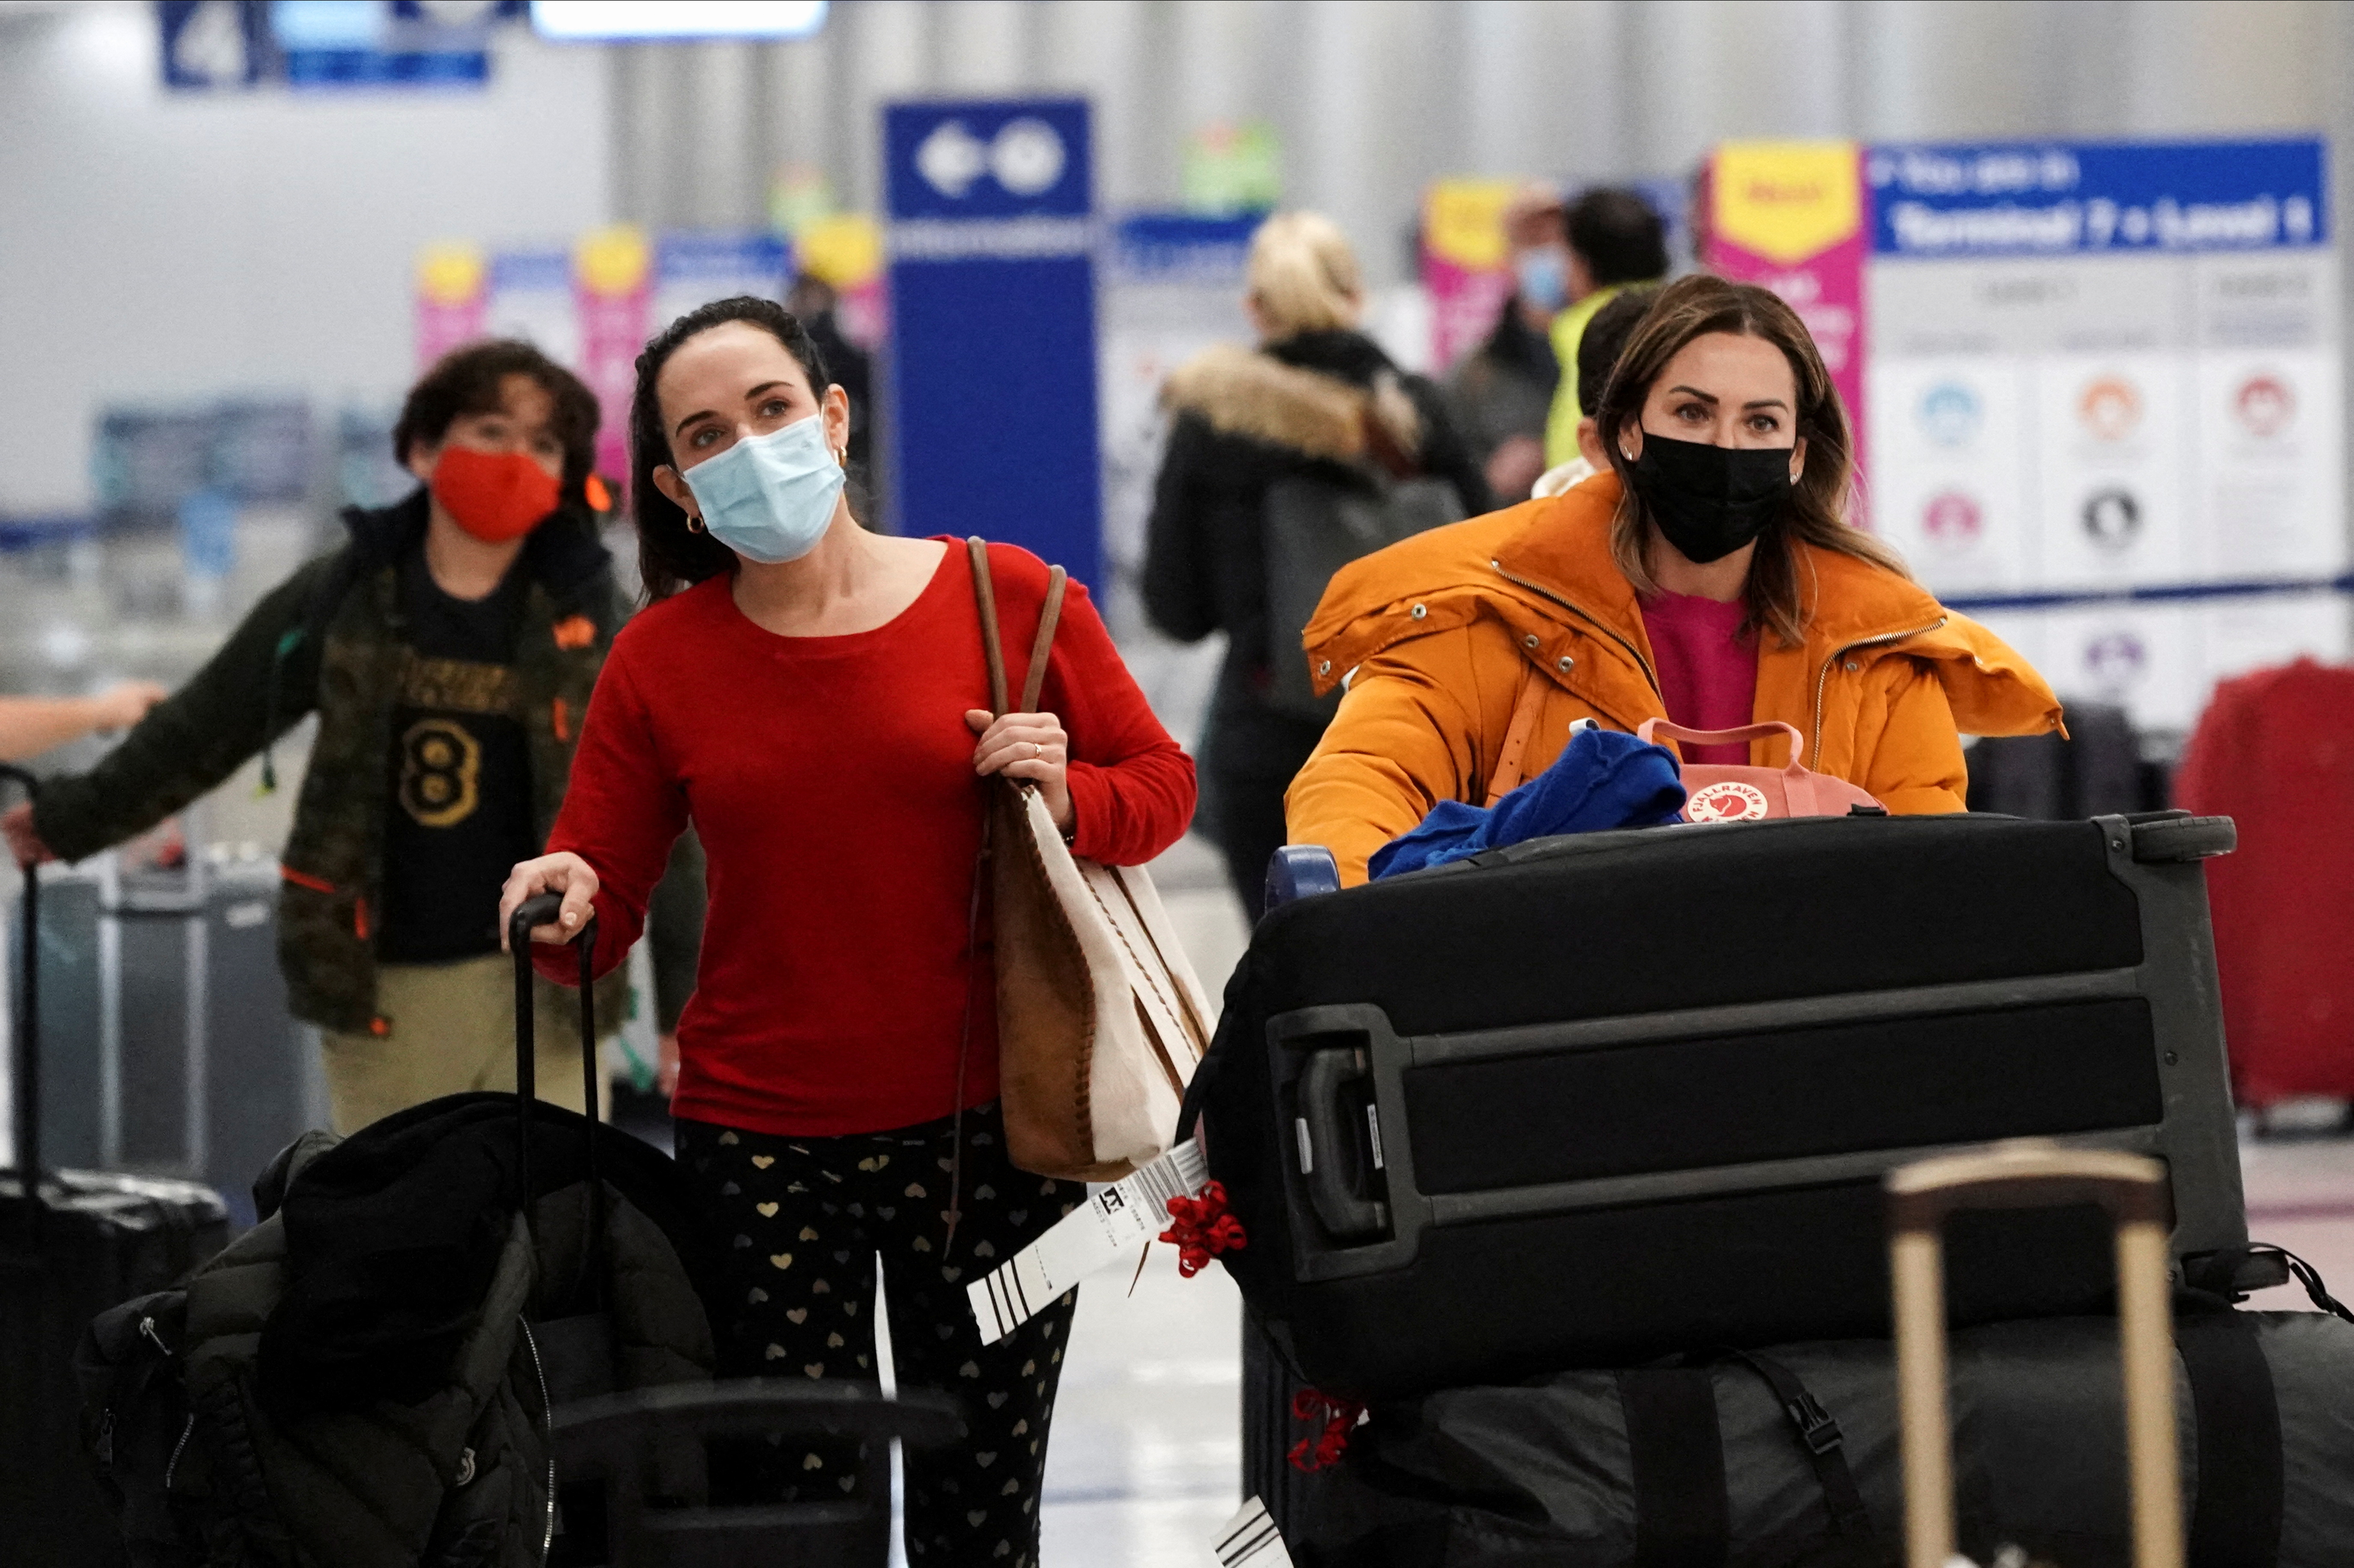 Travelers push their luggage past baggage claim inside the United Airlines terminal at Los Angeles International Airport (LAX) during the holiday season as the coronavirus disease (COVID-19) Omicron variant threatens to increase case numbers in Los Angeles, California, U.S. December 22, 2021. REUTERS/Bing Guan